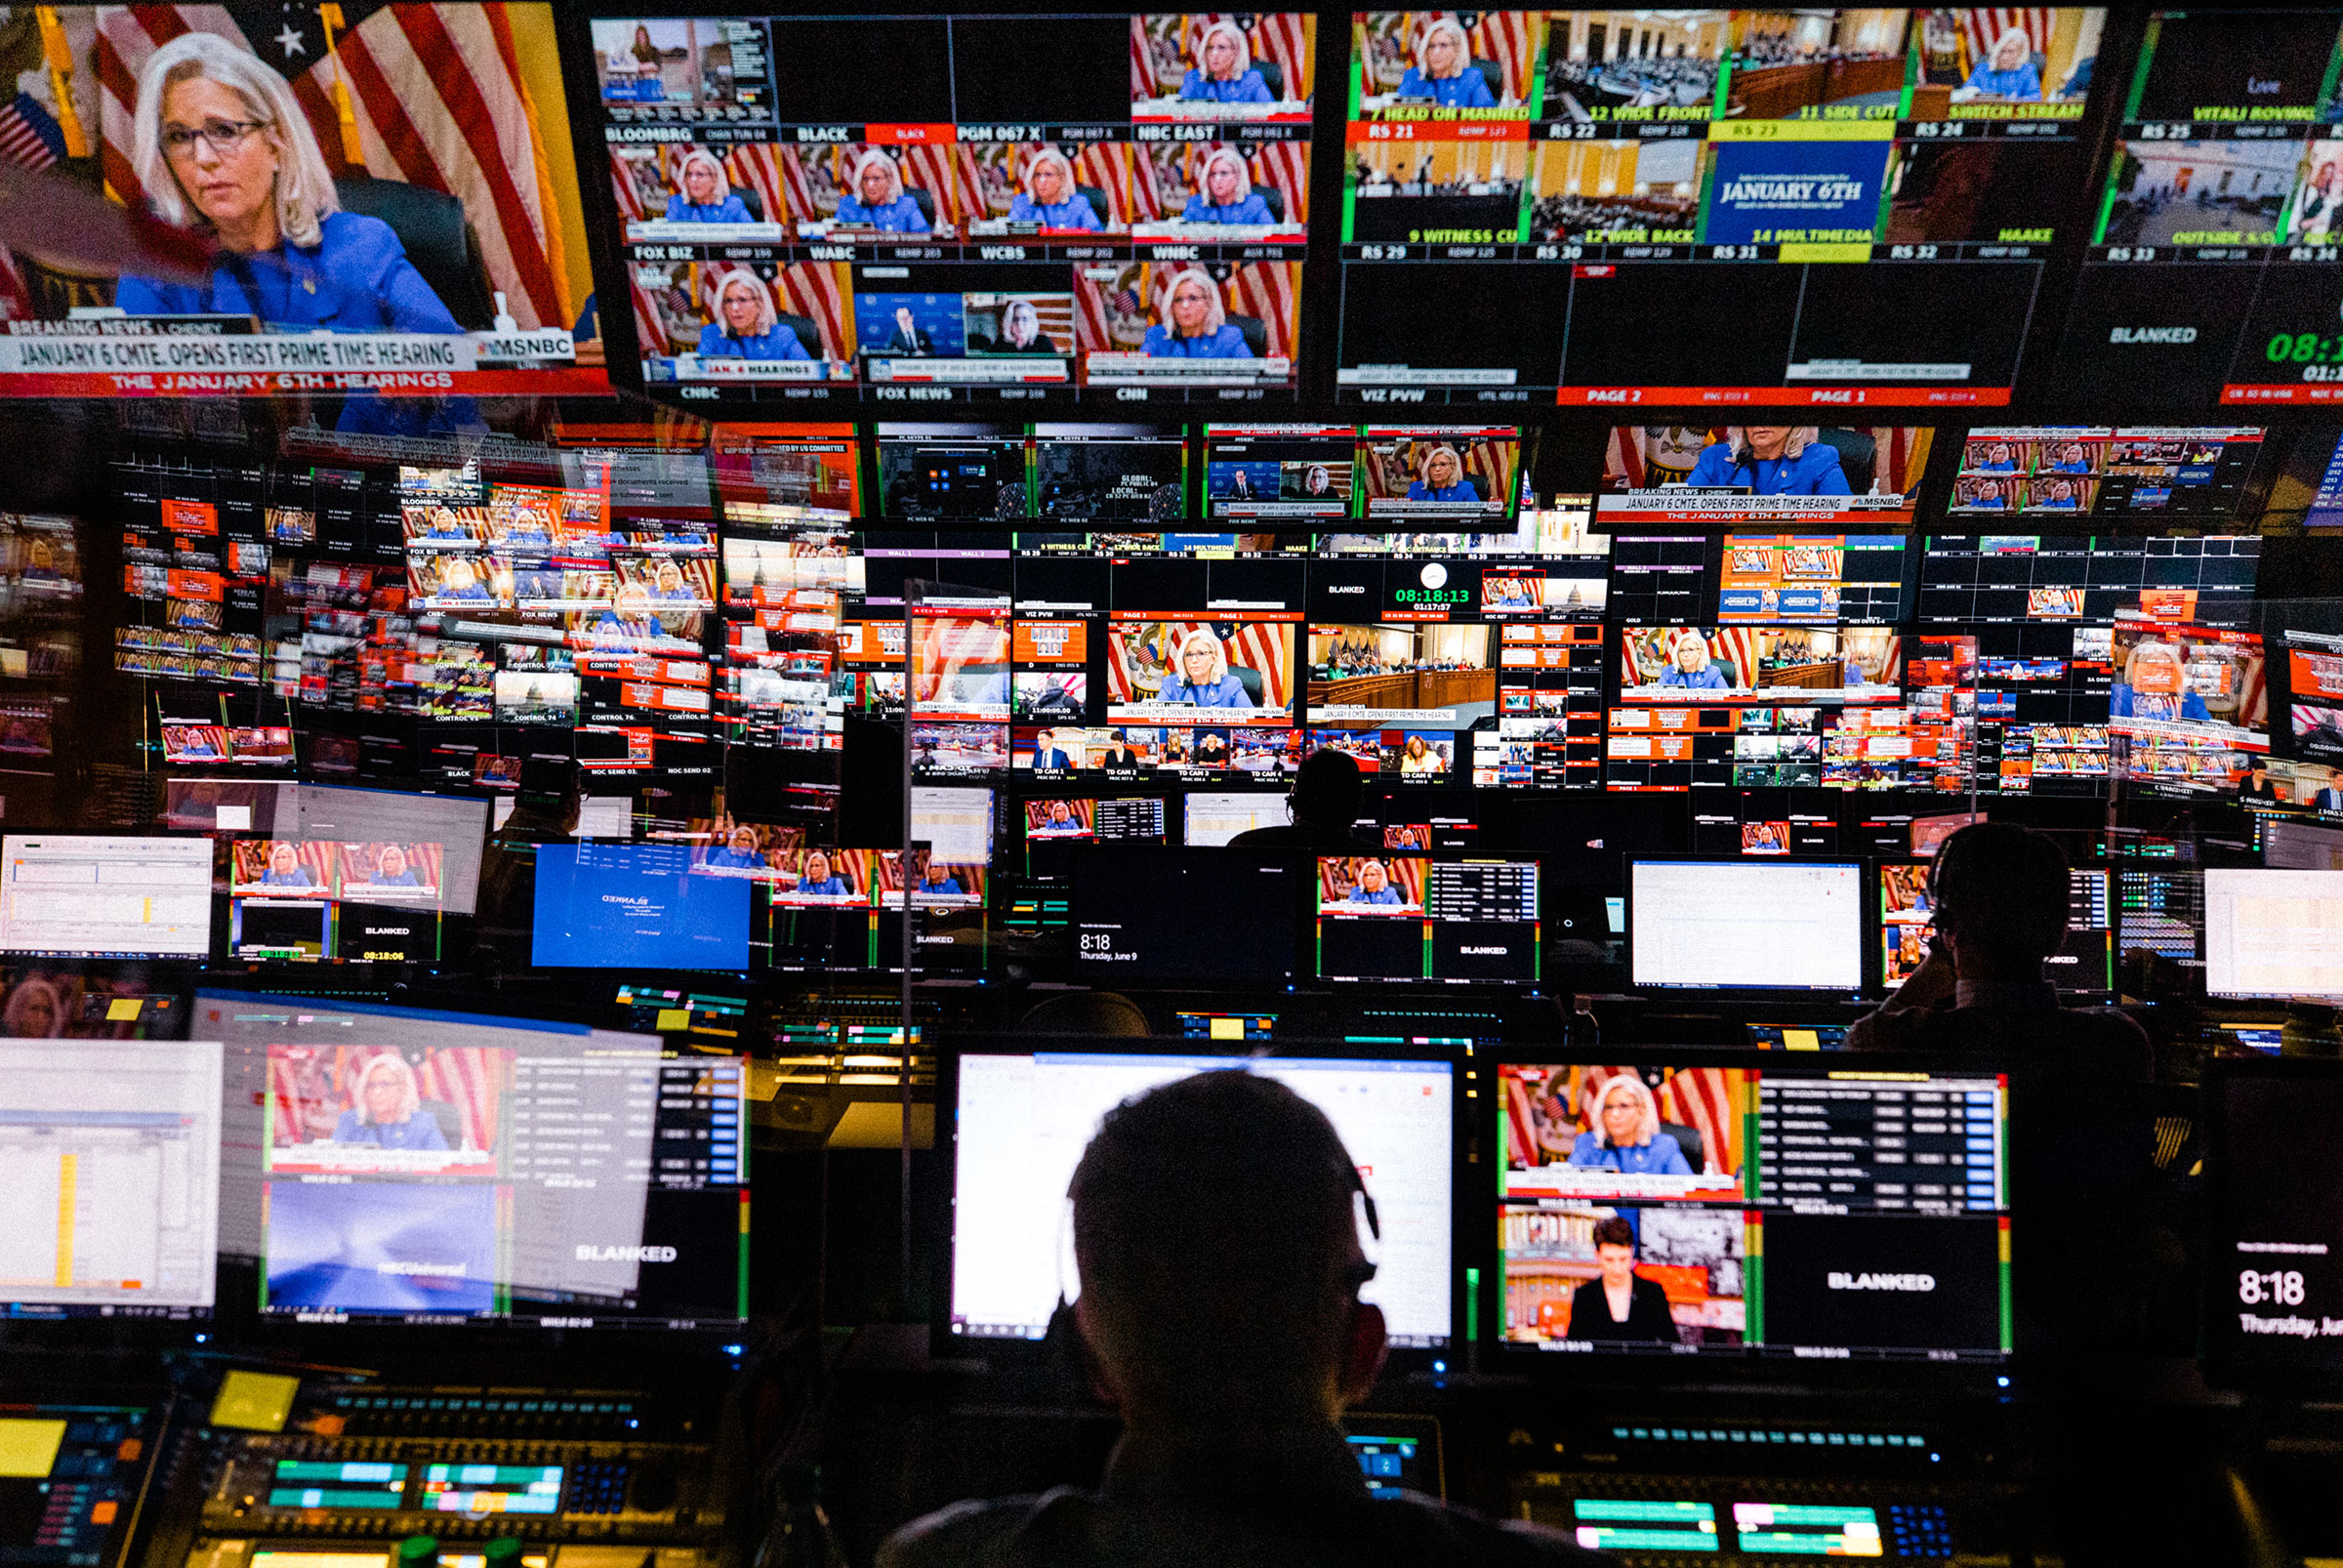 The control room at MSNBC's studio in New York City on June 9, during the first public hearing before the House committee investigating the Jan. 6, 2021 attack on the U.S. Capitol. The hearing aired during prime time. (Sinna Nasseri—The New York Times/Redux)